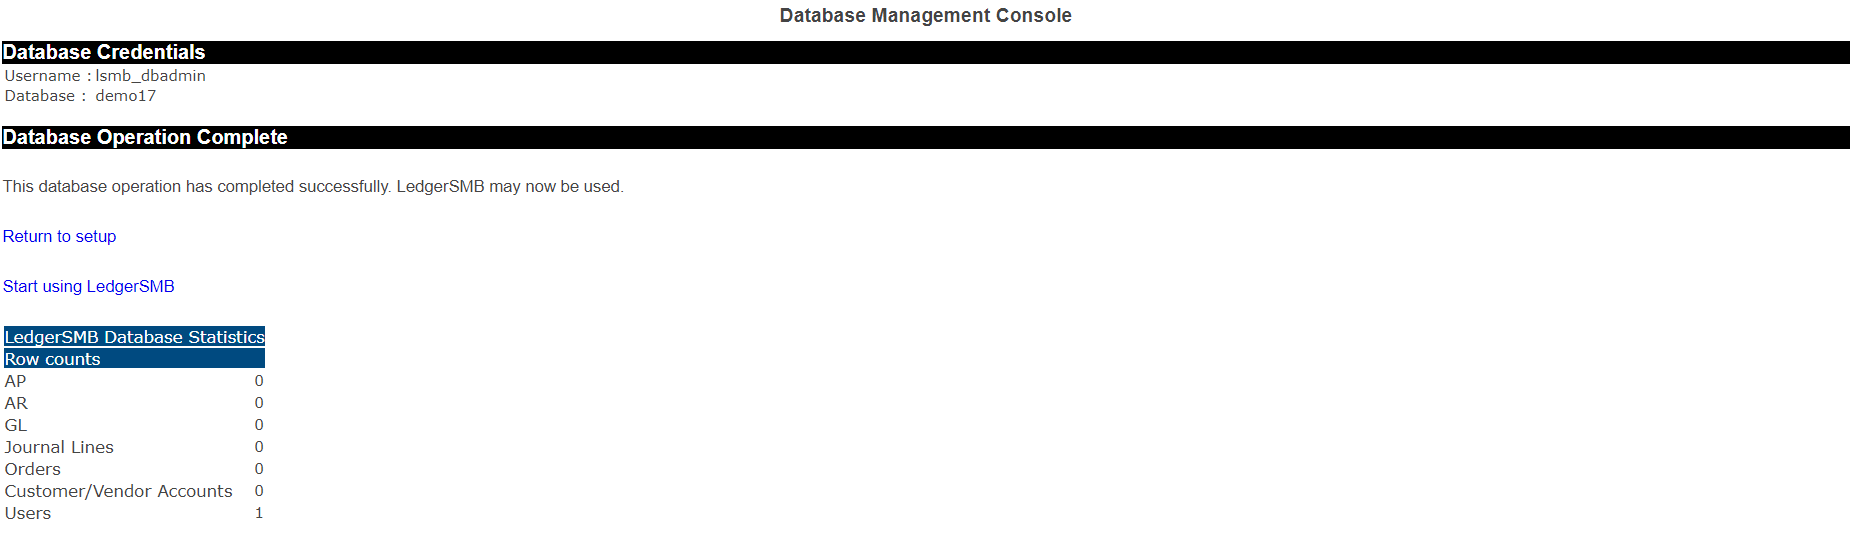 Confirmation of database creation (completed)